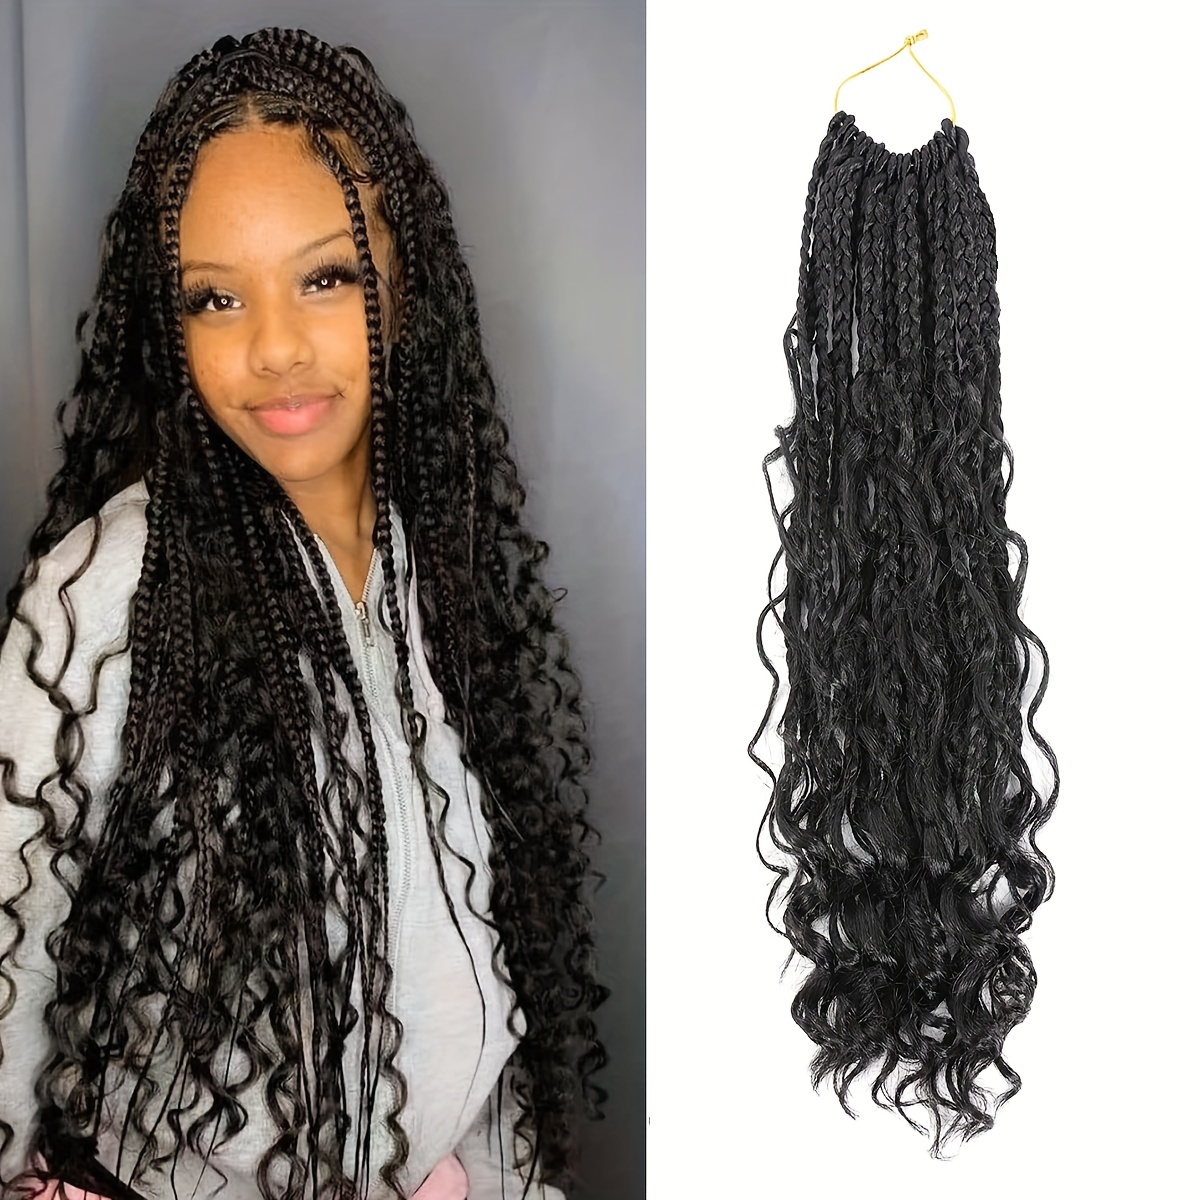 14 18 Inches Box Braids Crochet Hair With Curly Ends Bohemian